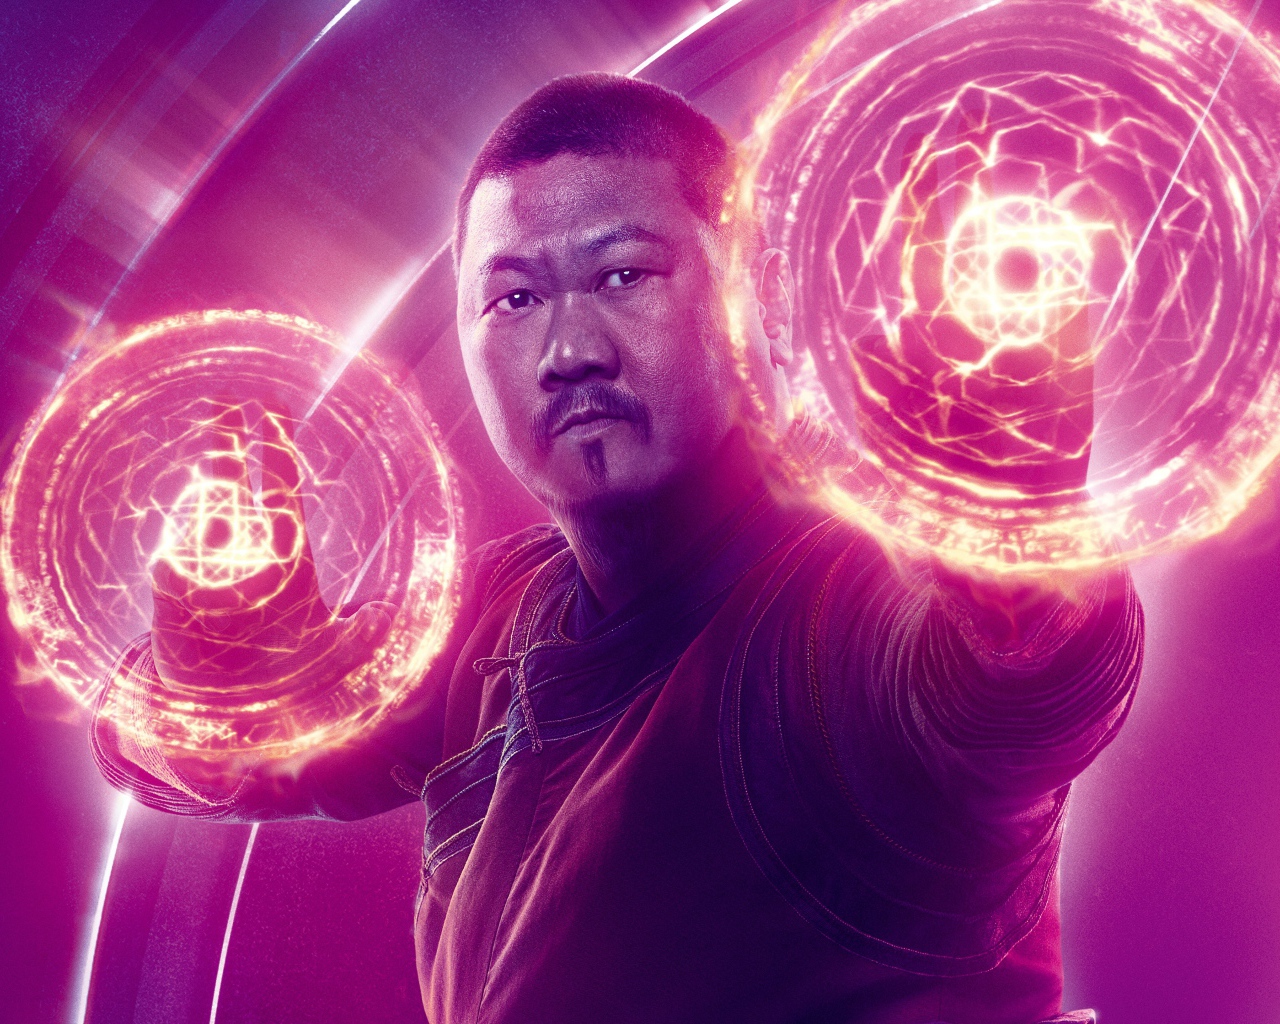 Wong character of the new movie The Avengers: War of Infinity